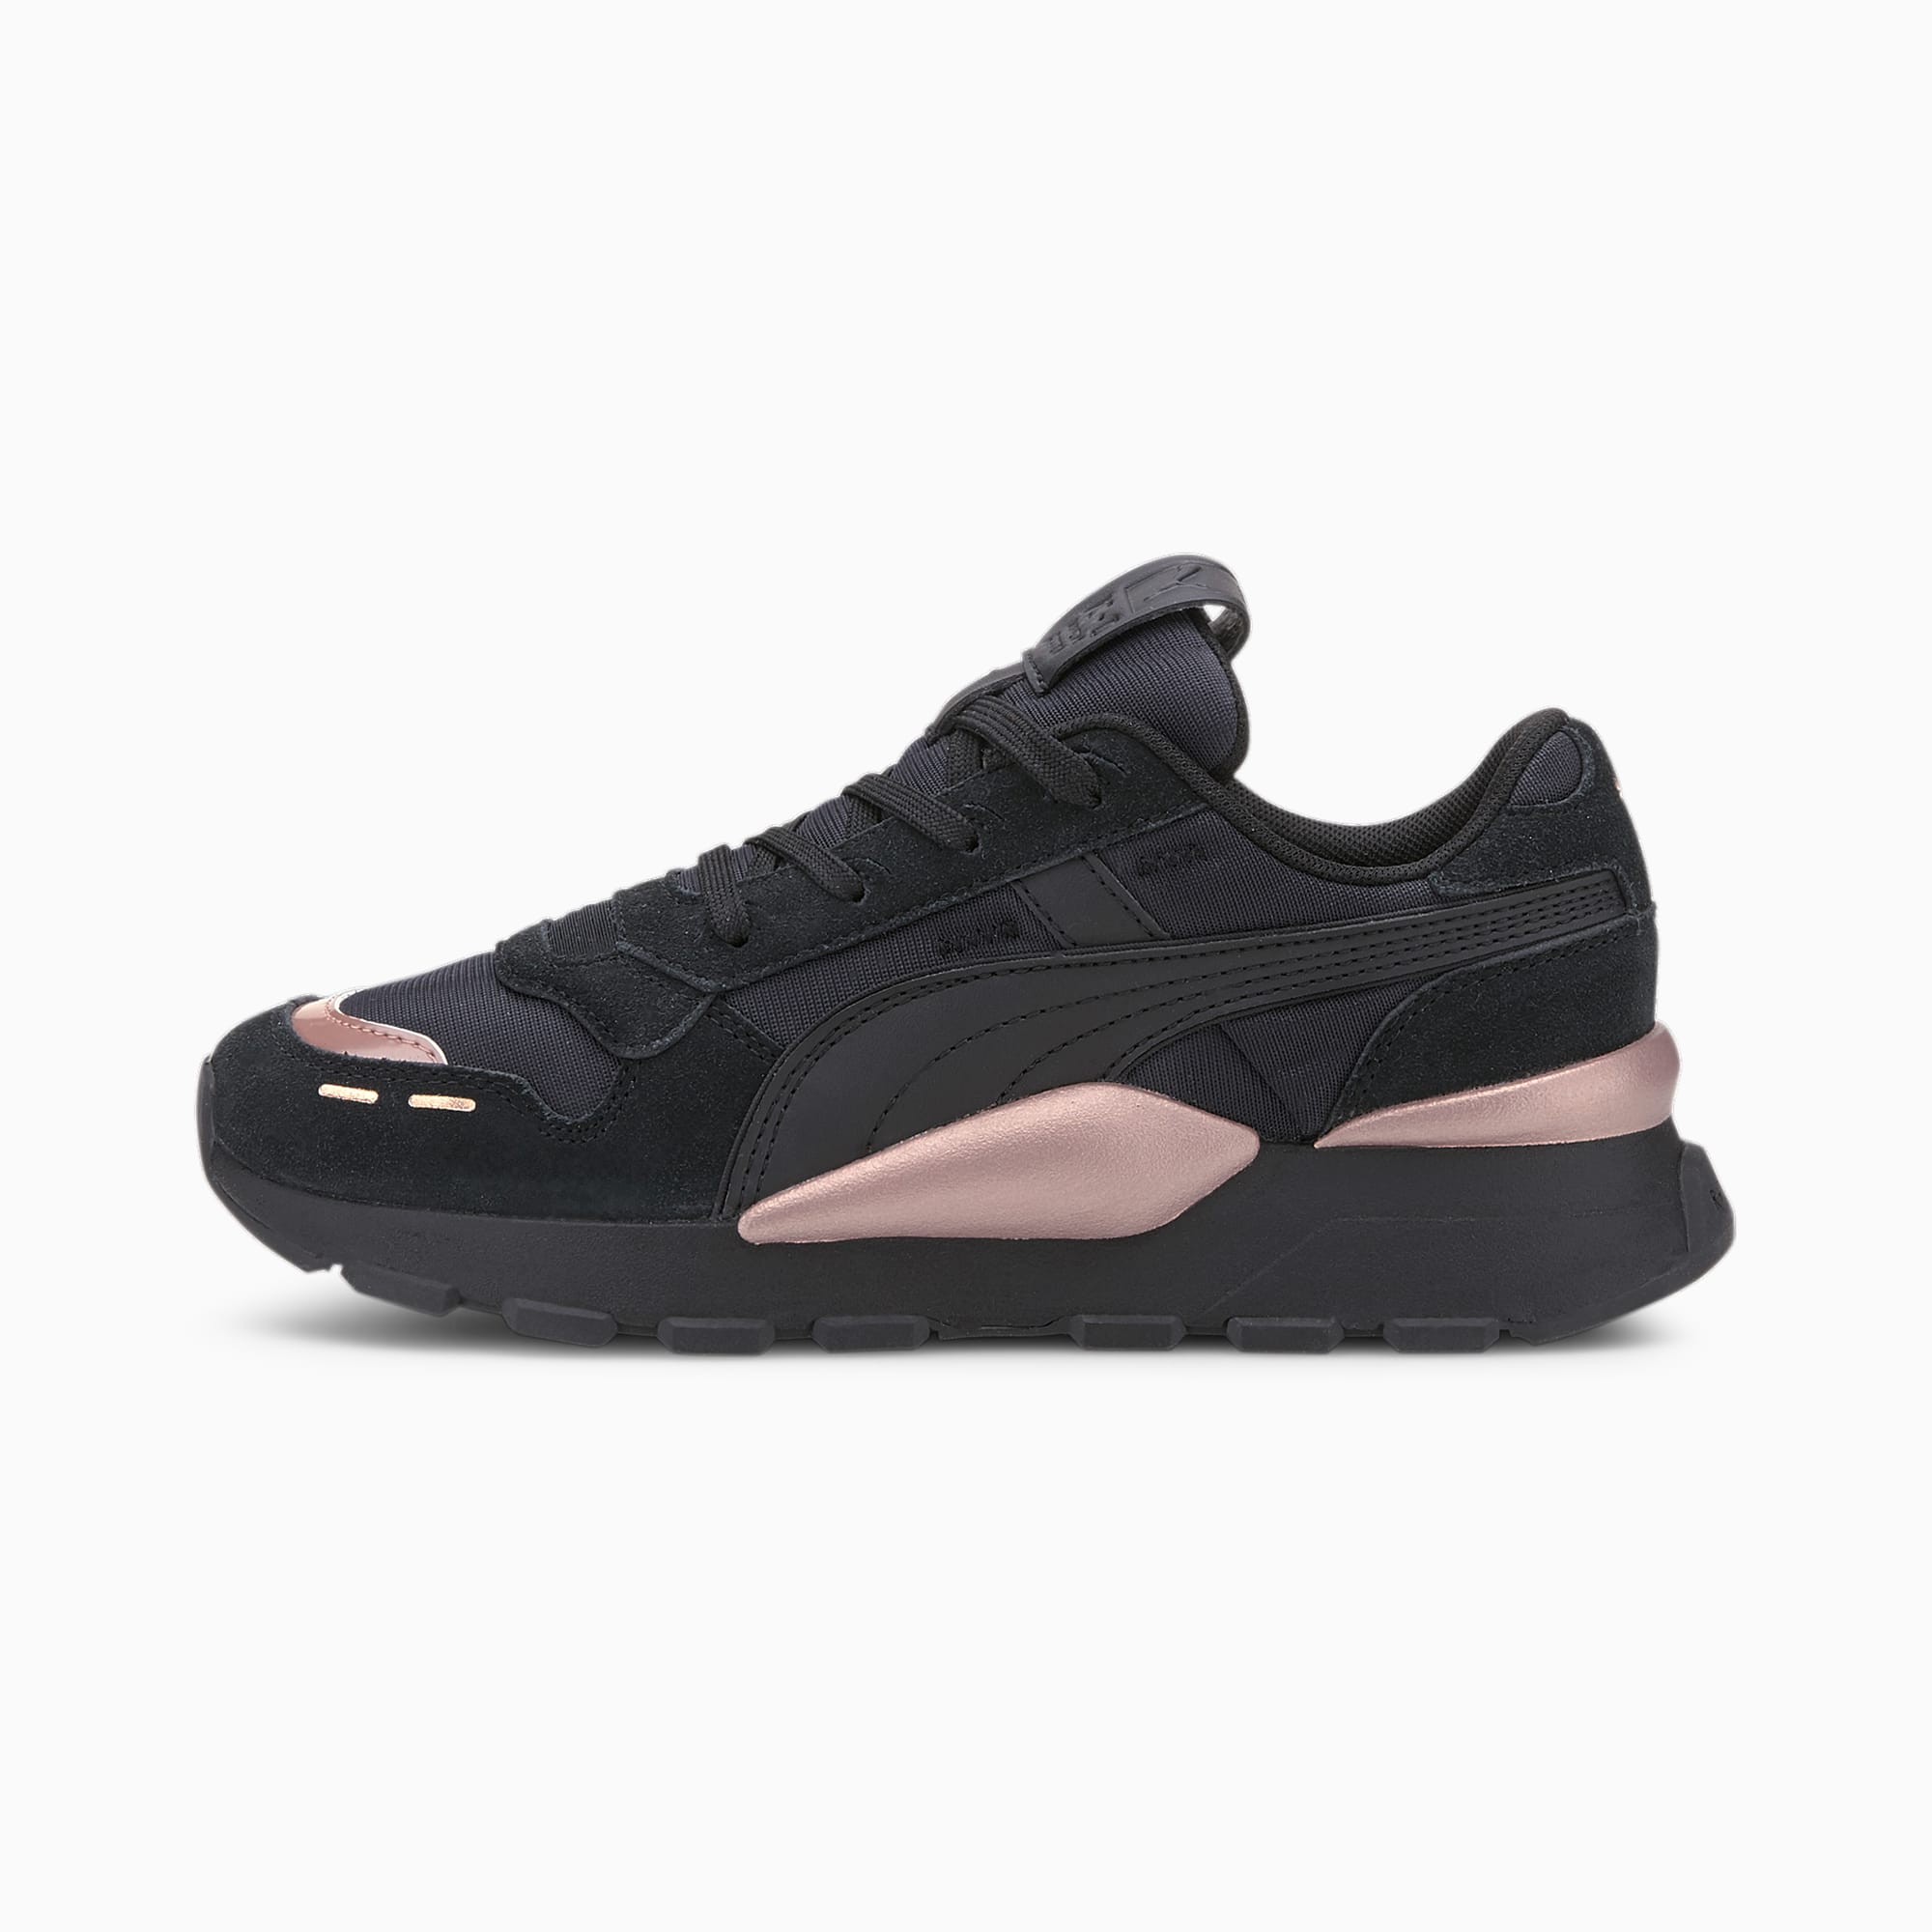 black and rose gold puma shoes